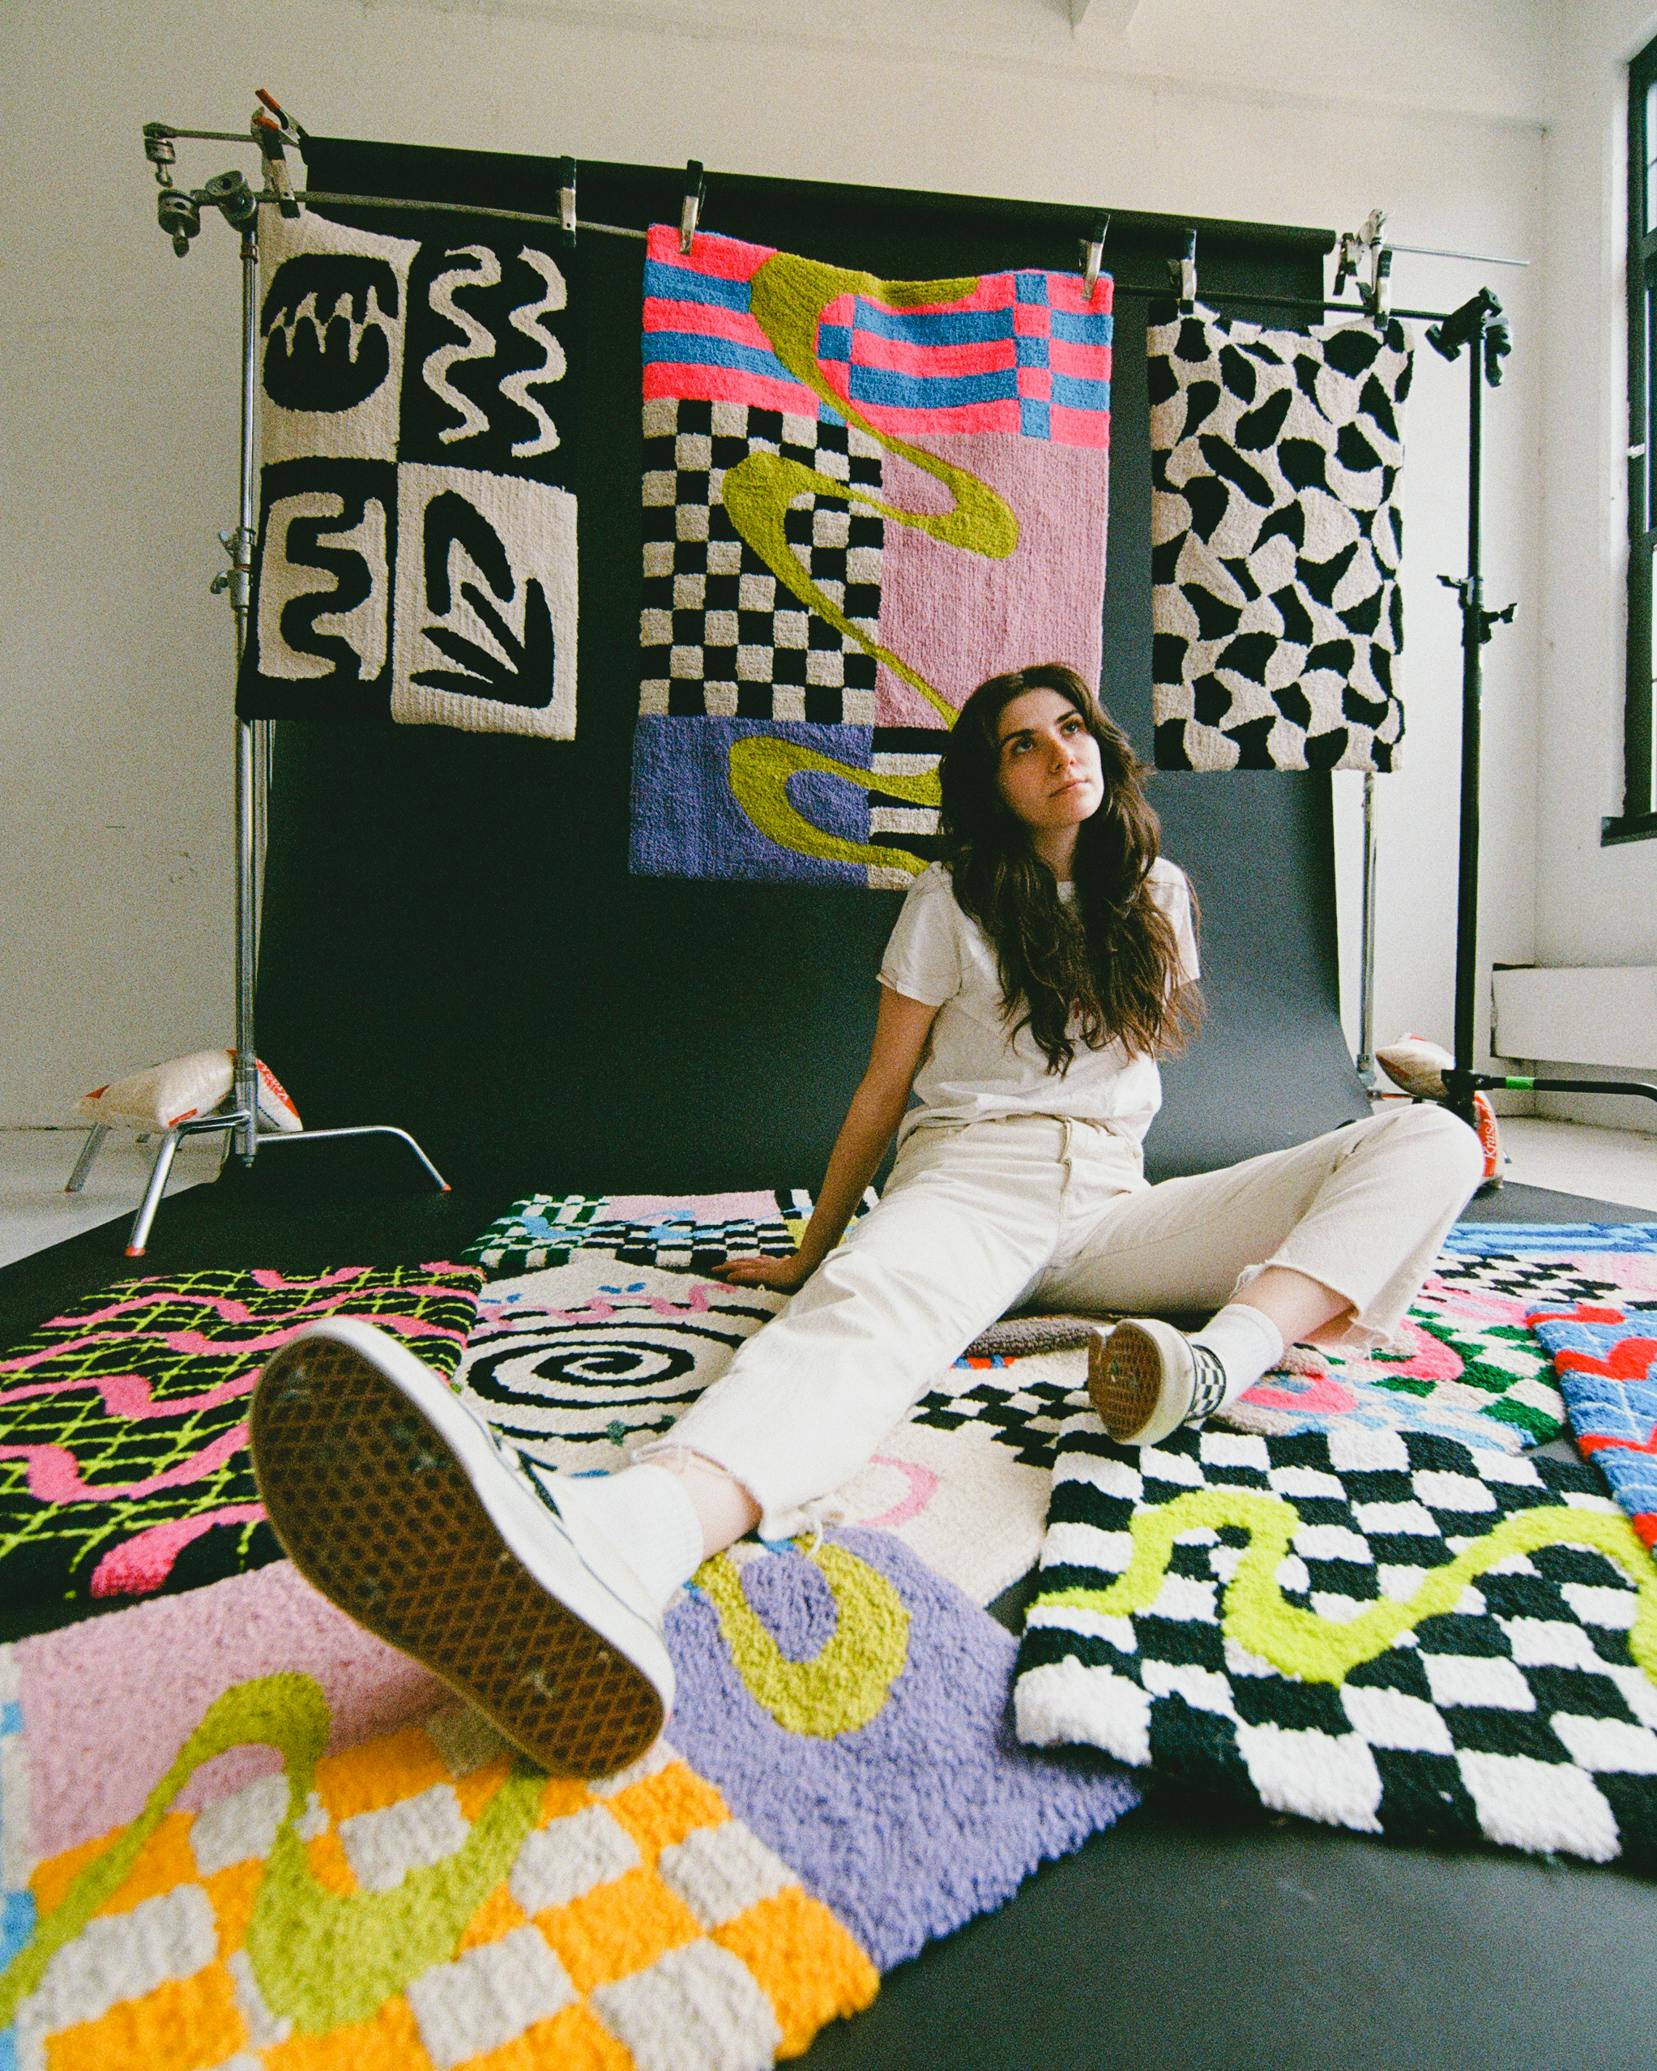 artist posing on floor with arrangement of colorful hand tufted rugs in displayed in studio against a black backdrop